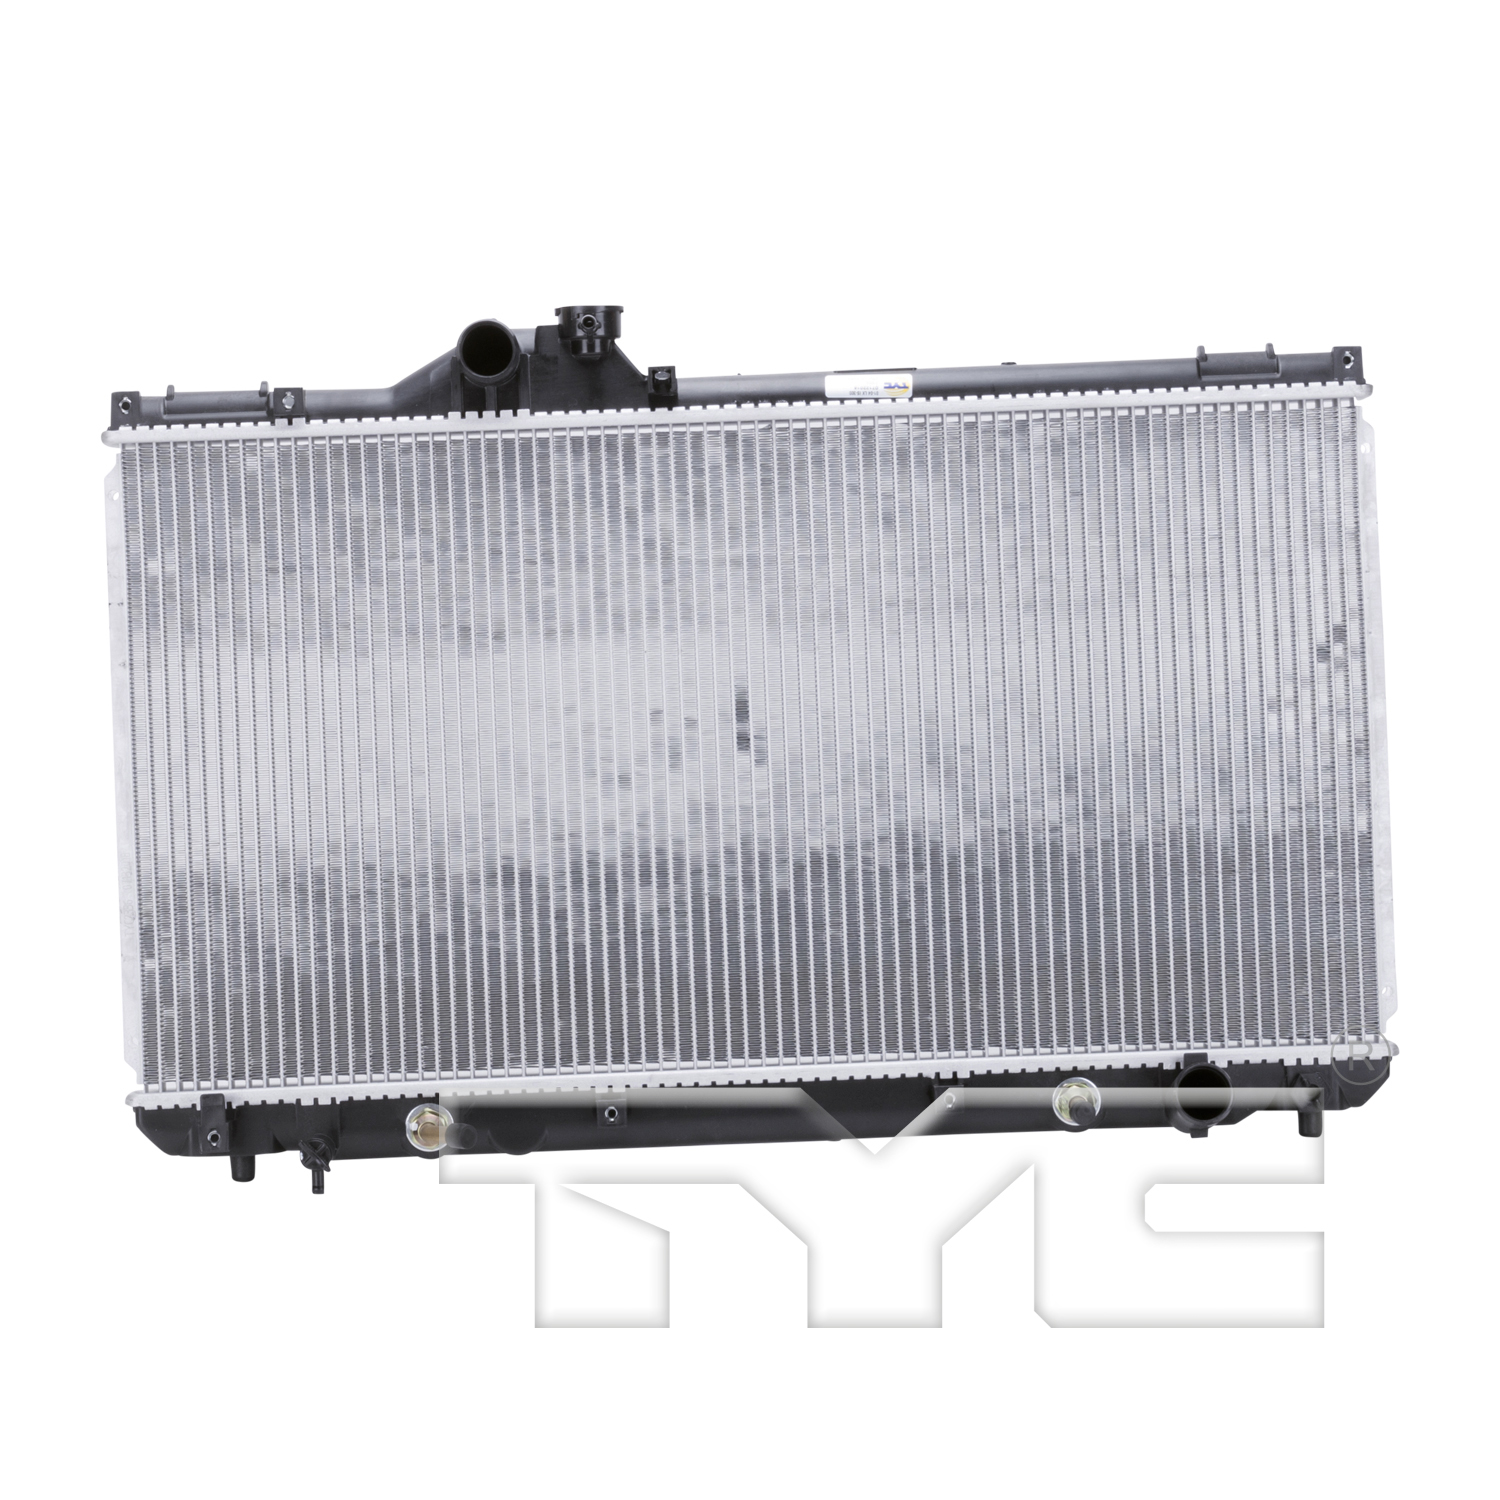 Aftermarket RADIATORS for LEXUS - IS300, IS300,01-04,Radiator assembly